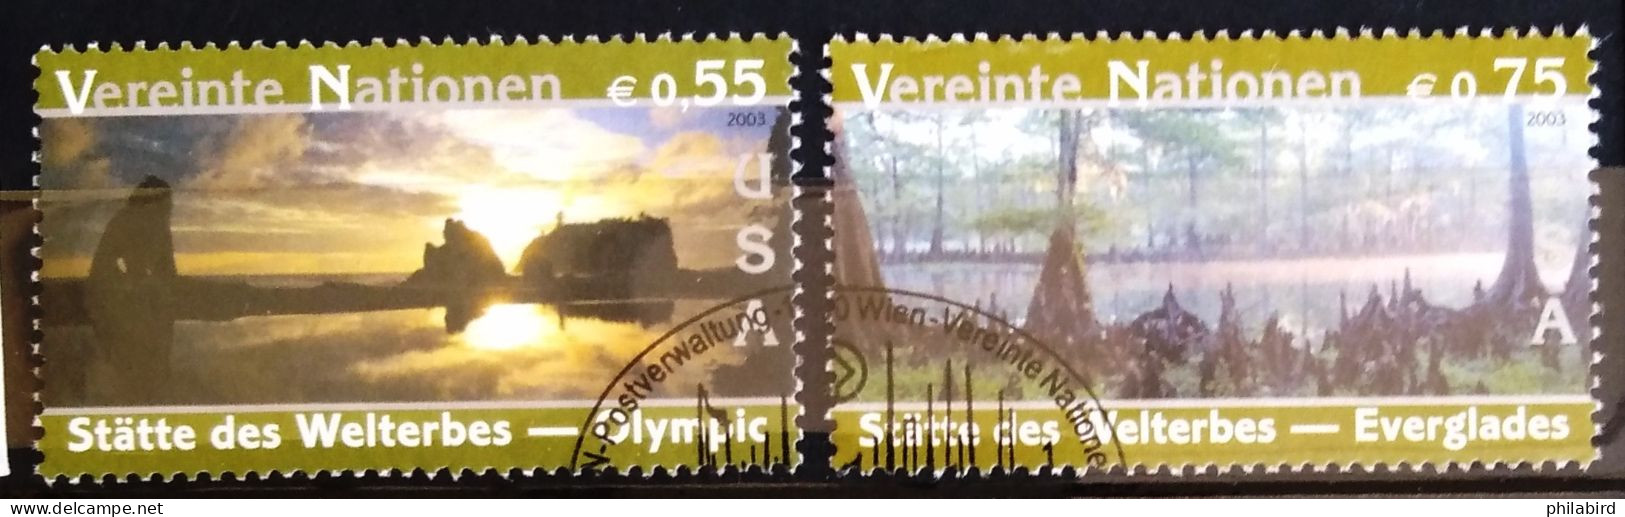 NATIONS-UNIS - VIENNE                         N° 410/411                      OBLITERE - Used Stamps